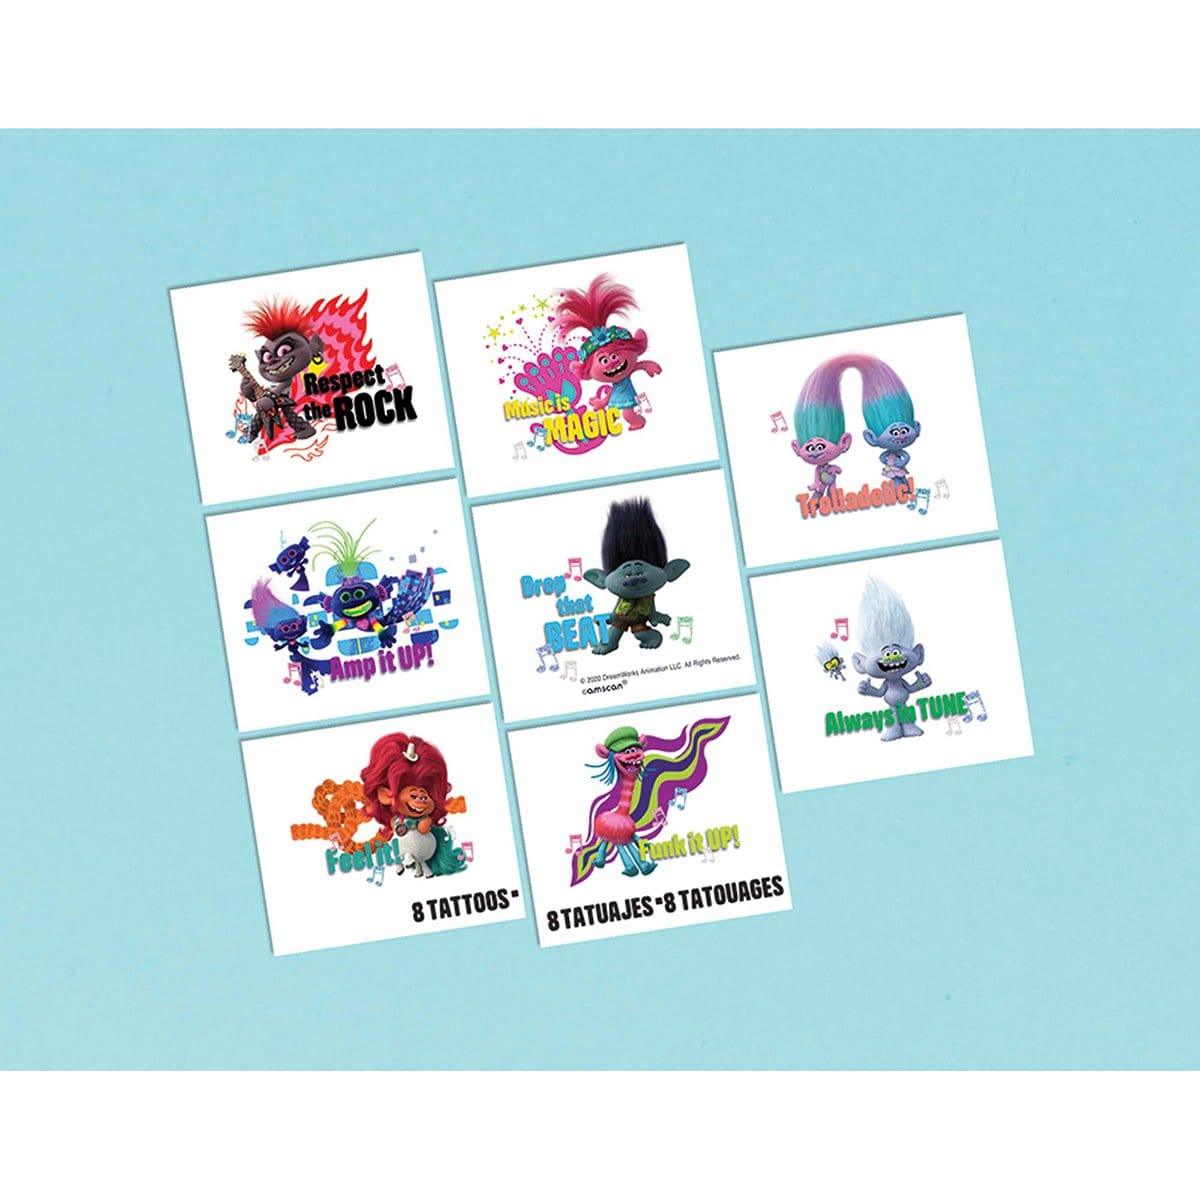 Buy Kids Birthday Trolls World Tour temporary tattoos, 8 per package sold at Party Expert